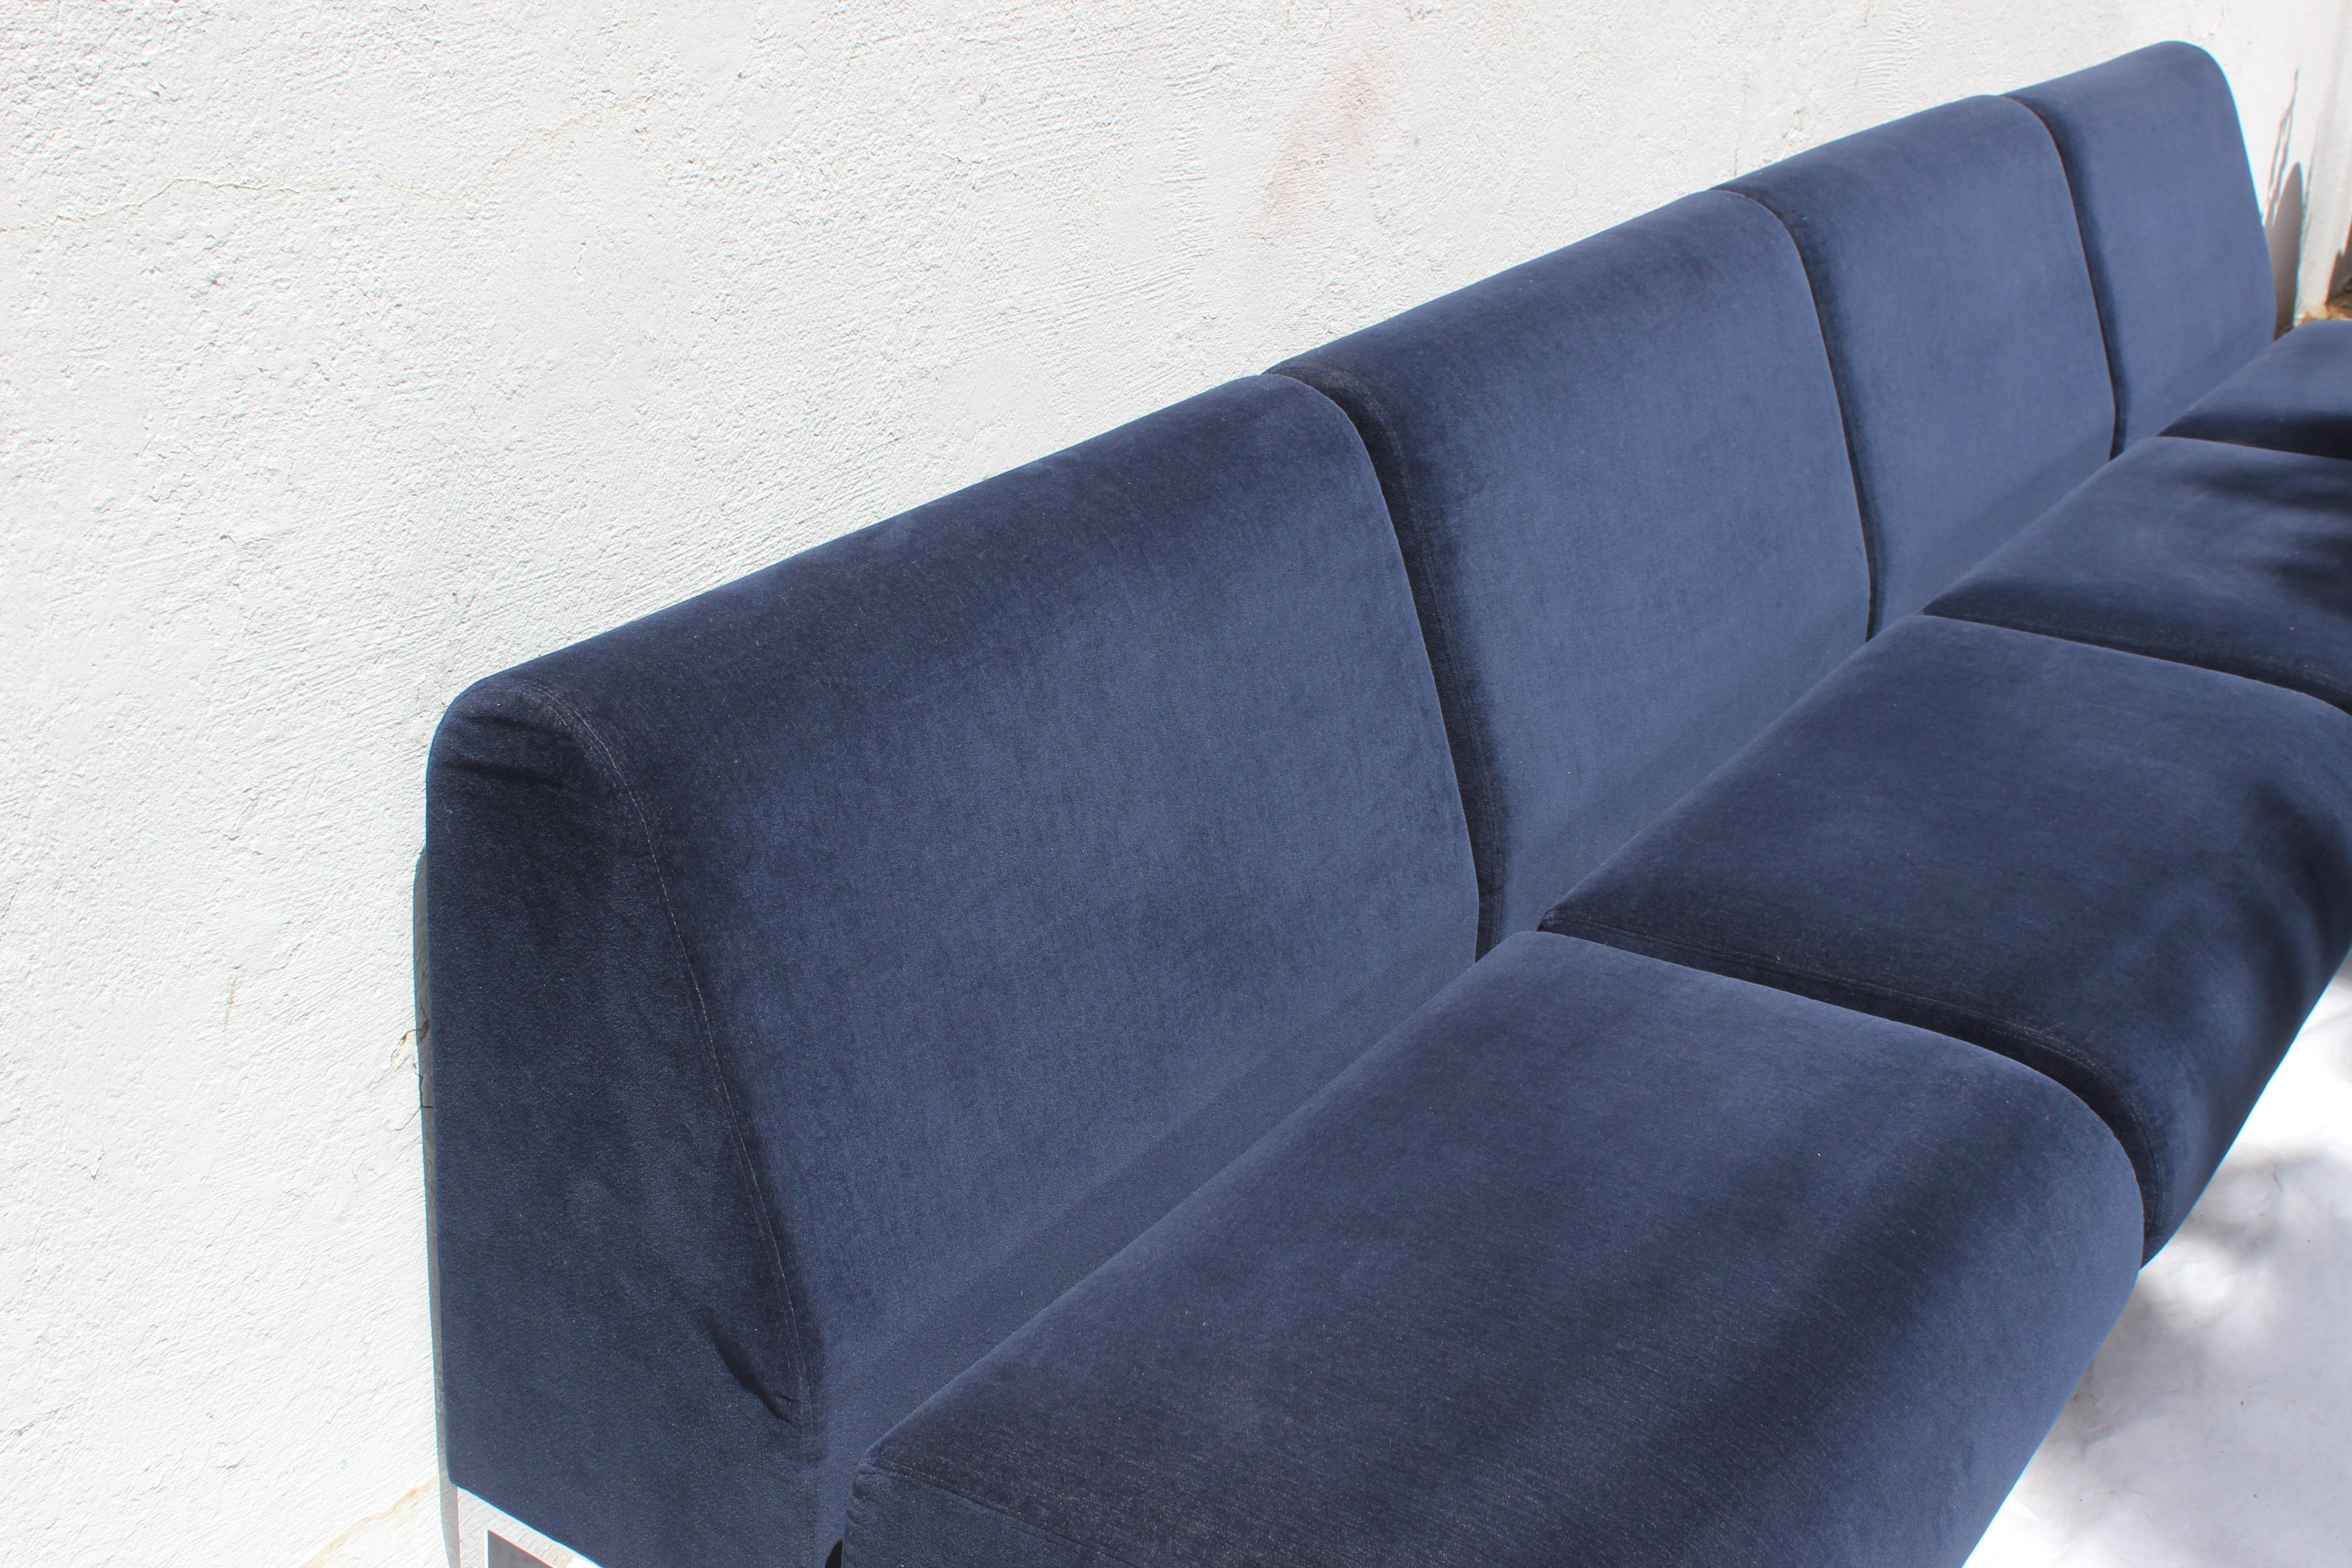 Set of four Mid-Century Modern club chairs upholstered in commercial grade Blue Velvet. They make a wonderful sectional.

Each one measures
31.5